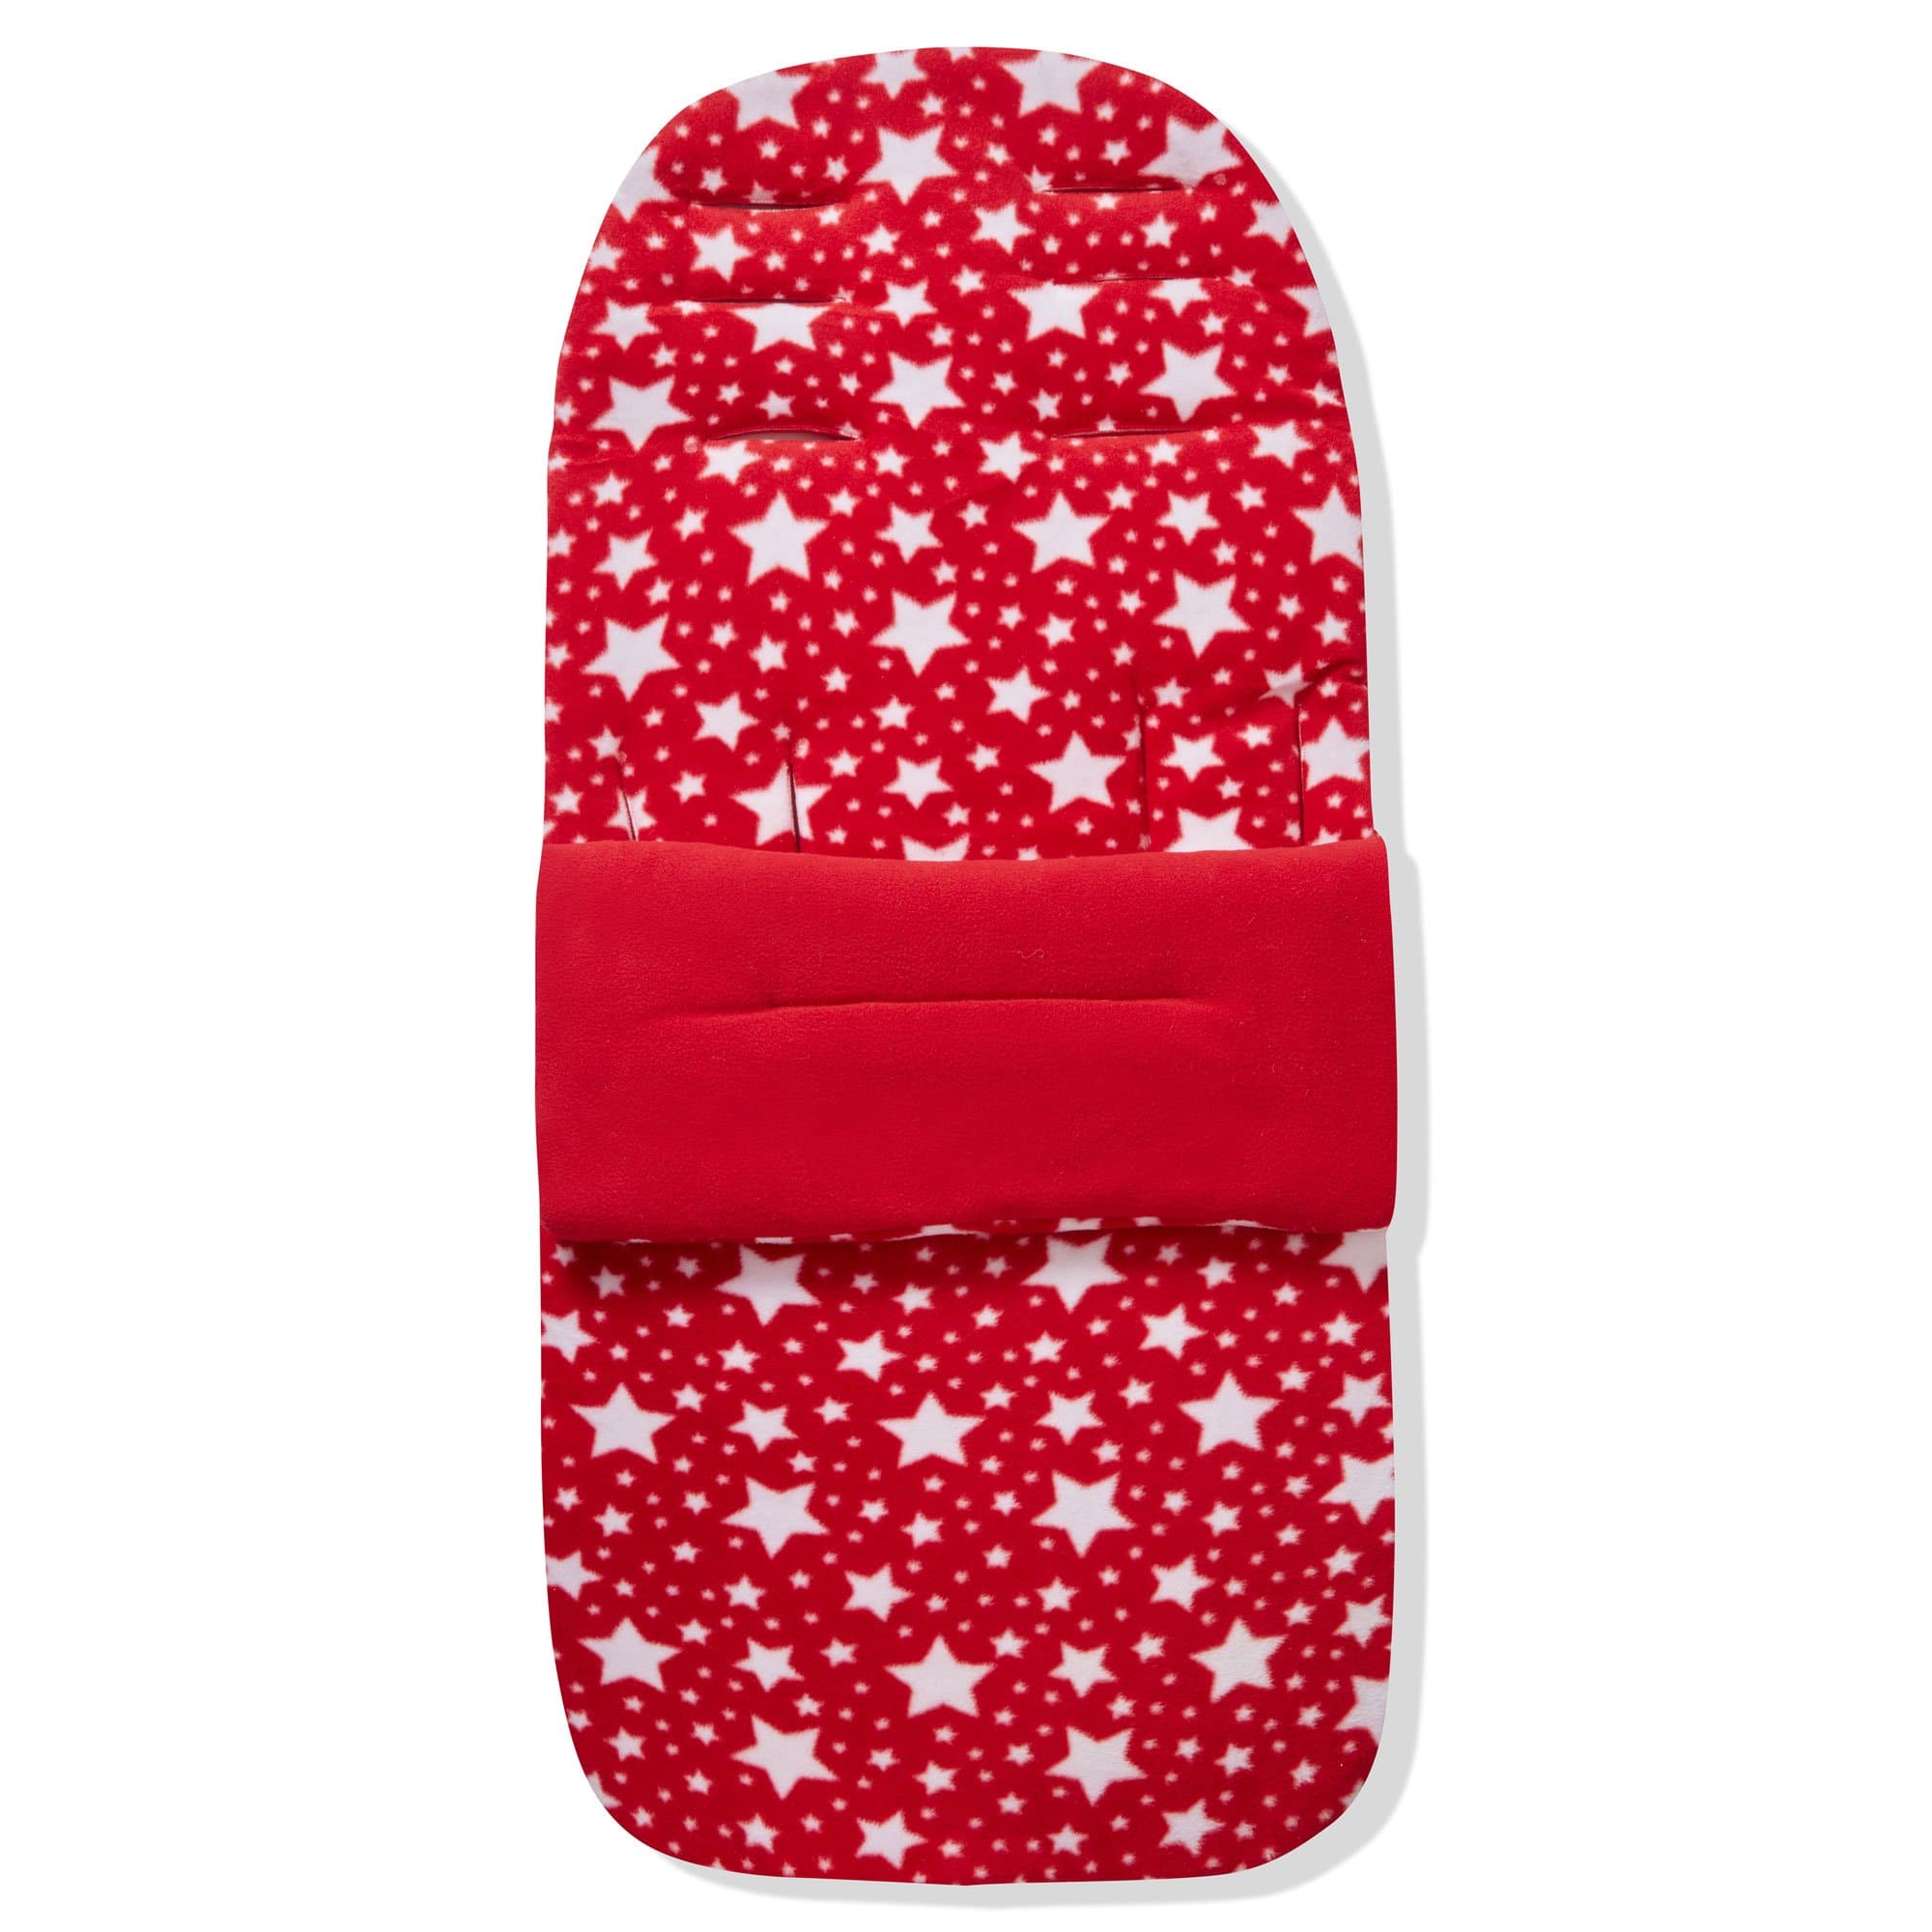 Fleece Footmuff / Cosy Toes Compatible With Bugaboo - For Your Little One